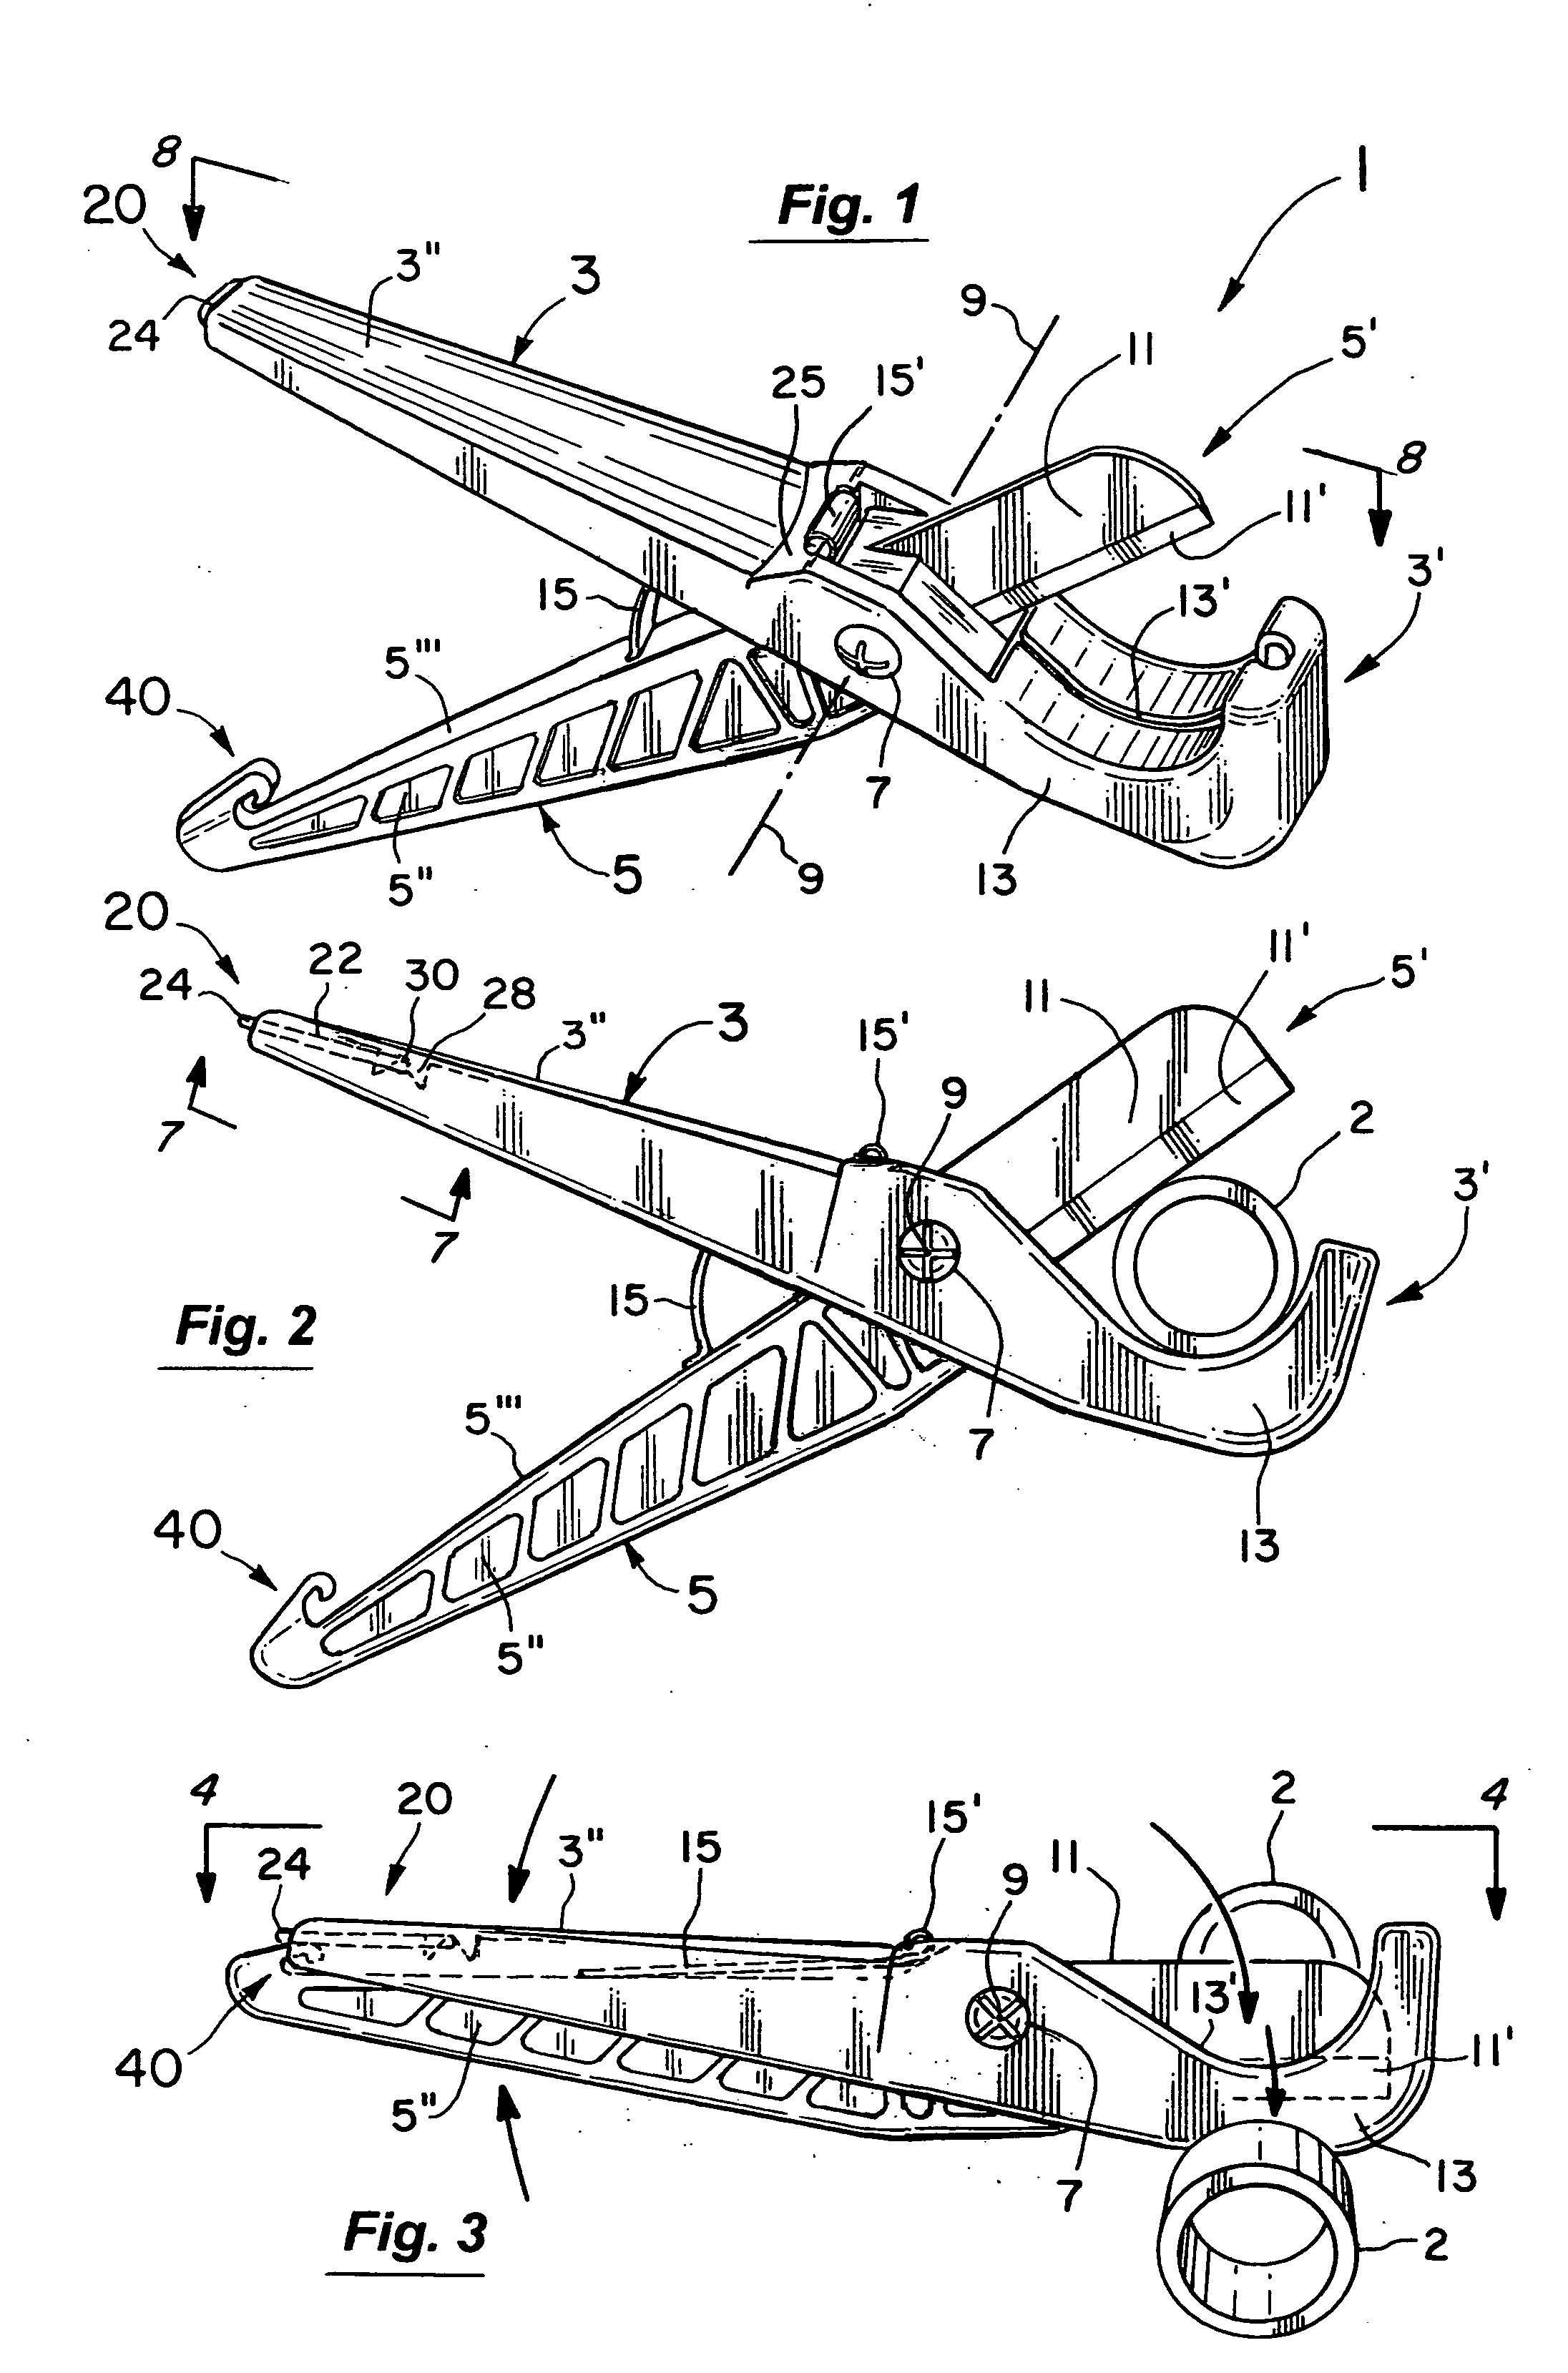 Self-locking cutting tool for plastic pipes